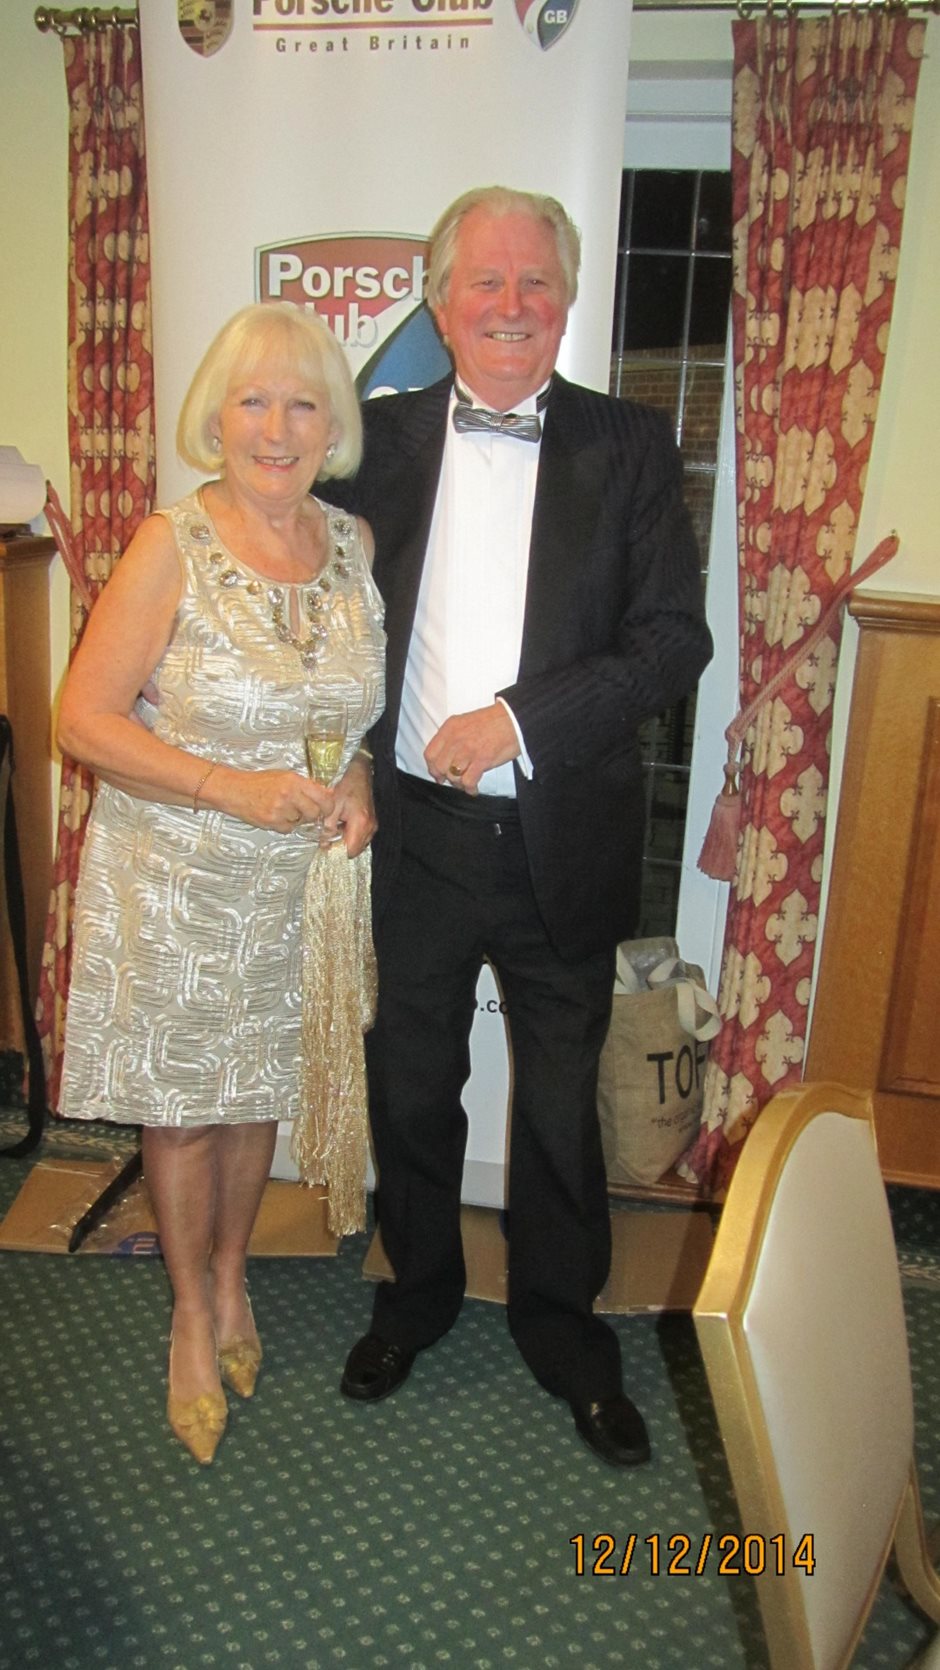 Photo 15 from the R29 2014 Christmas Dinner gallery